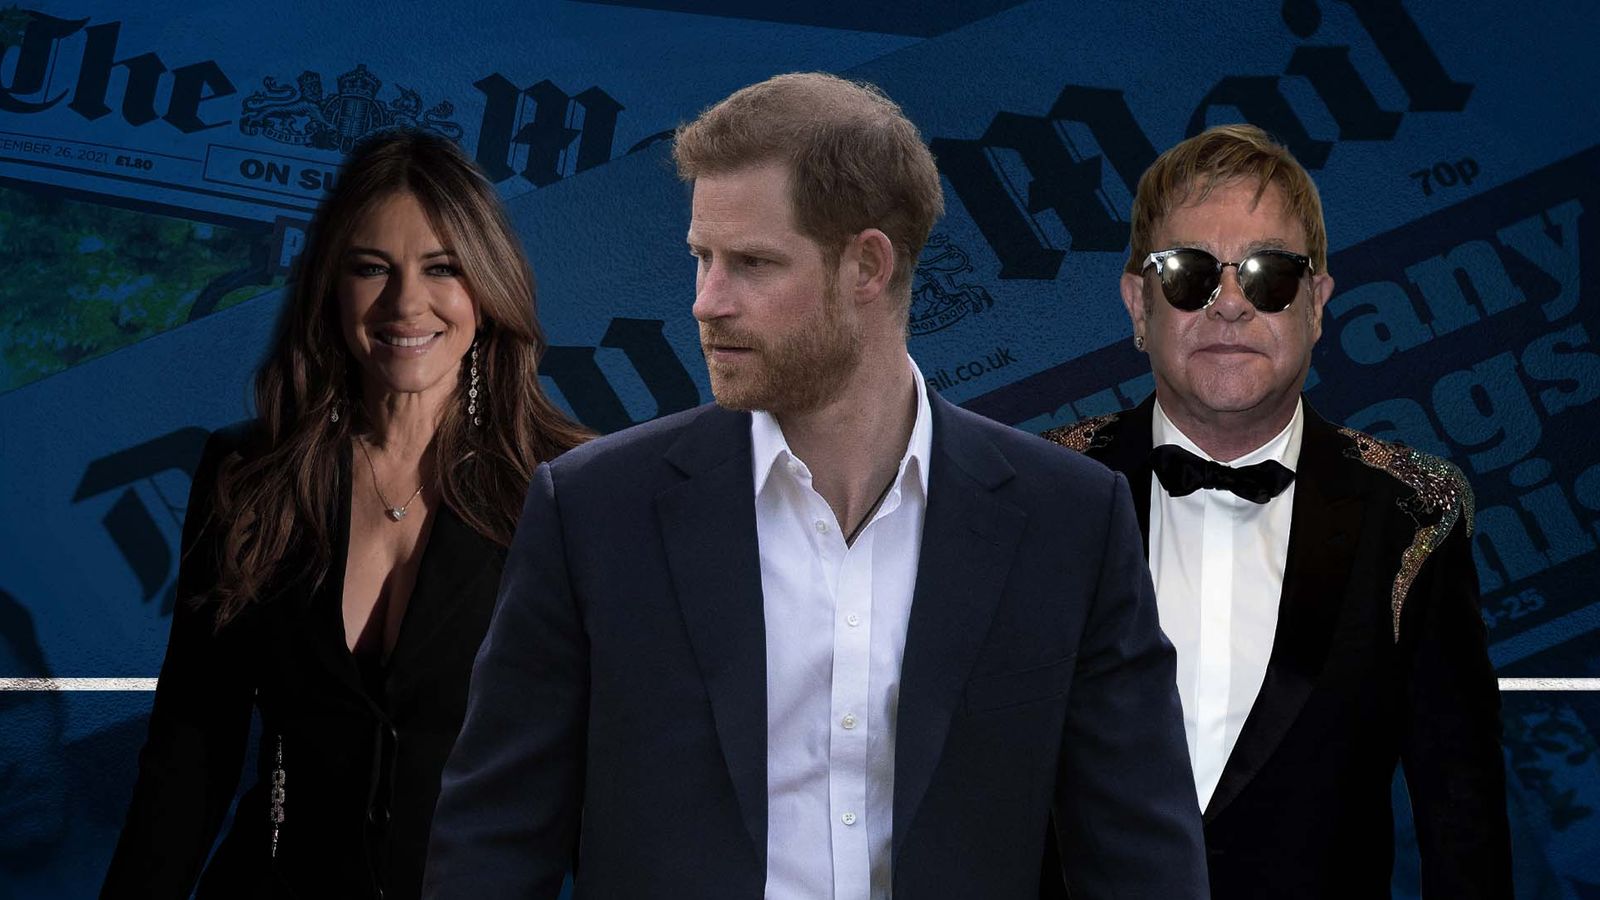 Prince Harry v Associated Newspapers: Everything you need to know about the Duke of Sussex's latest court case